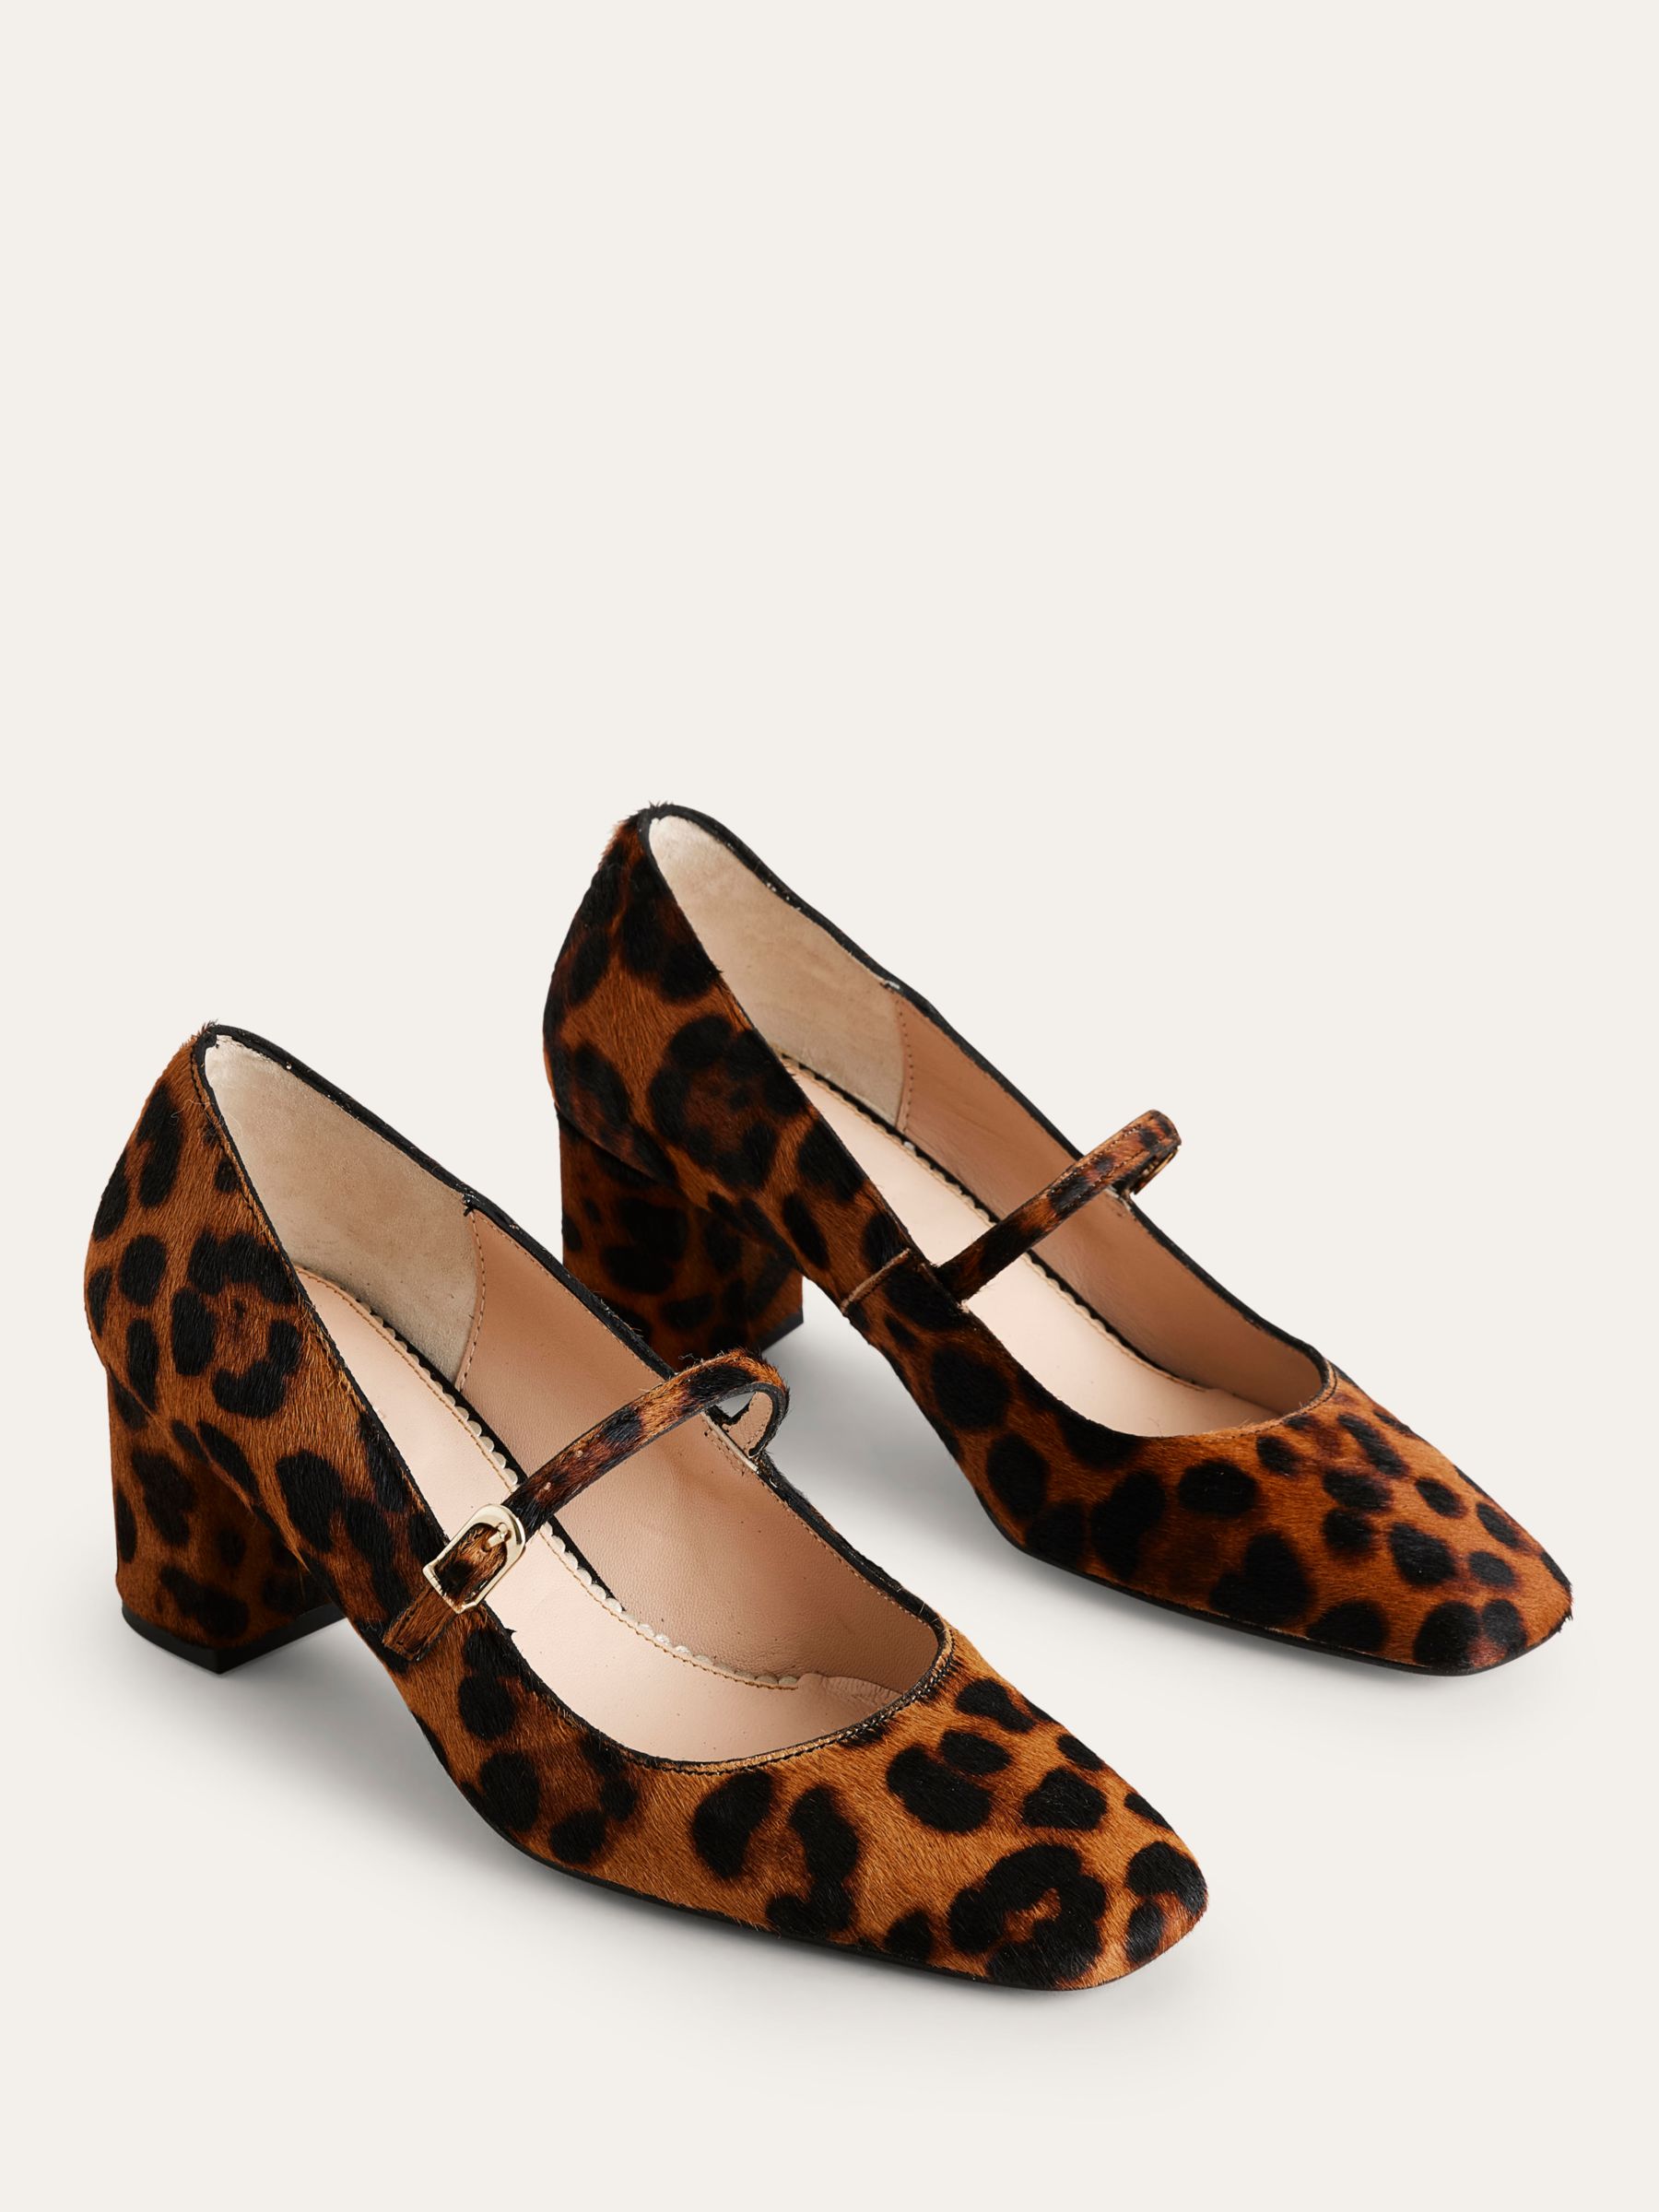 Boden Mary Jane Block Heel Shoes, Classic Leopard Pony, 4